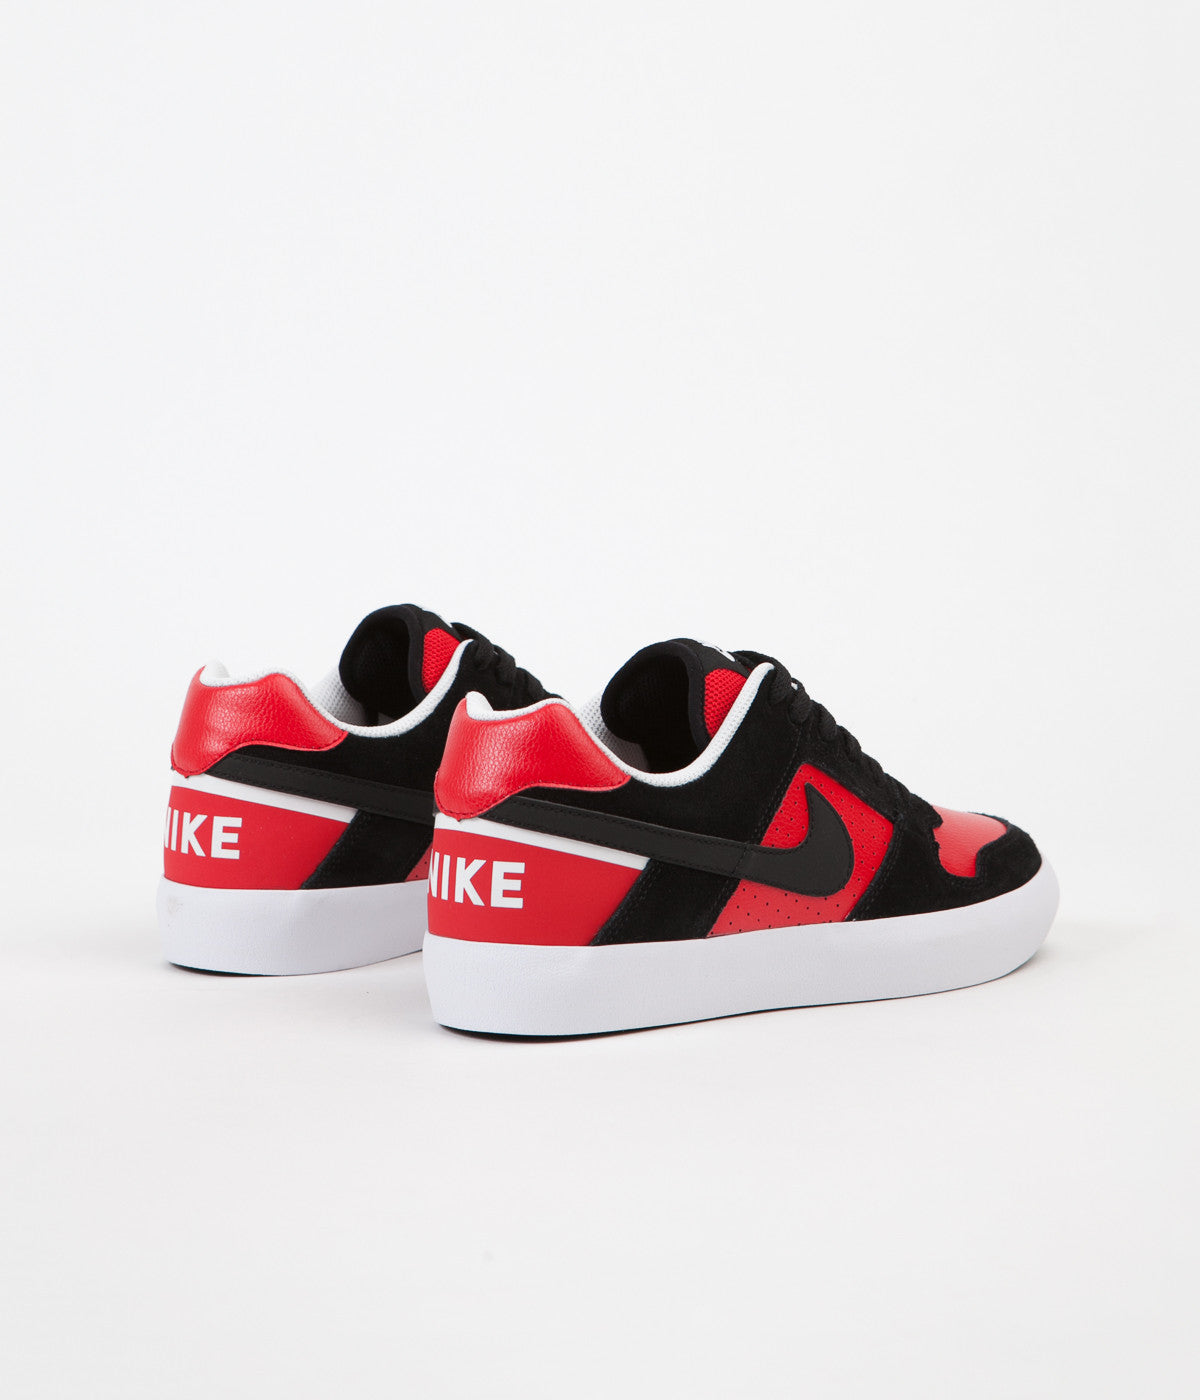 nike sb delta force red